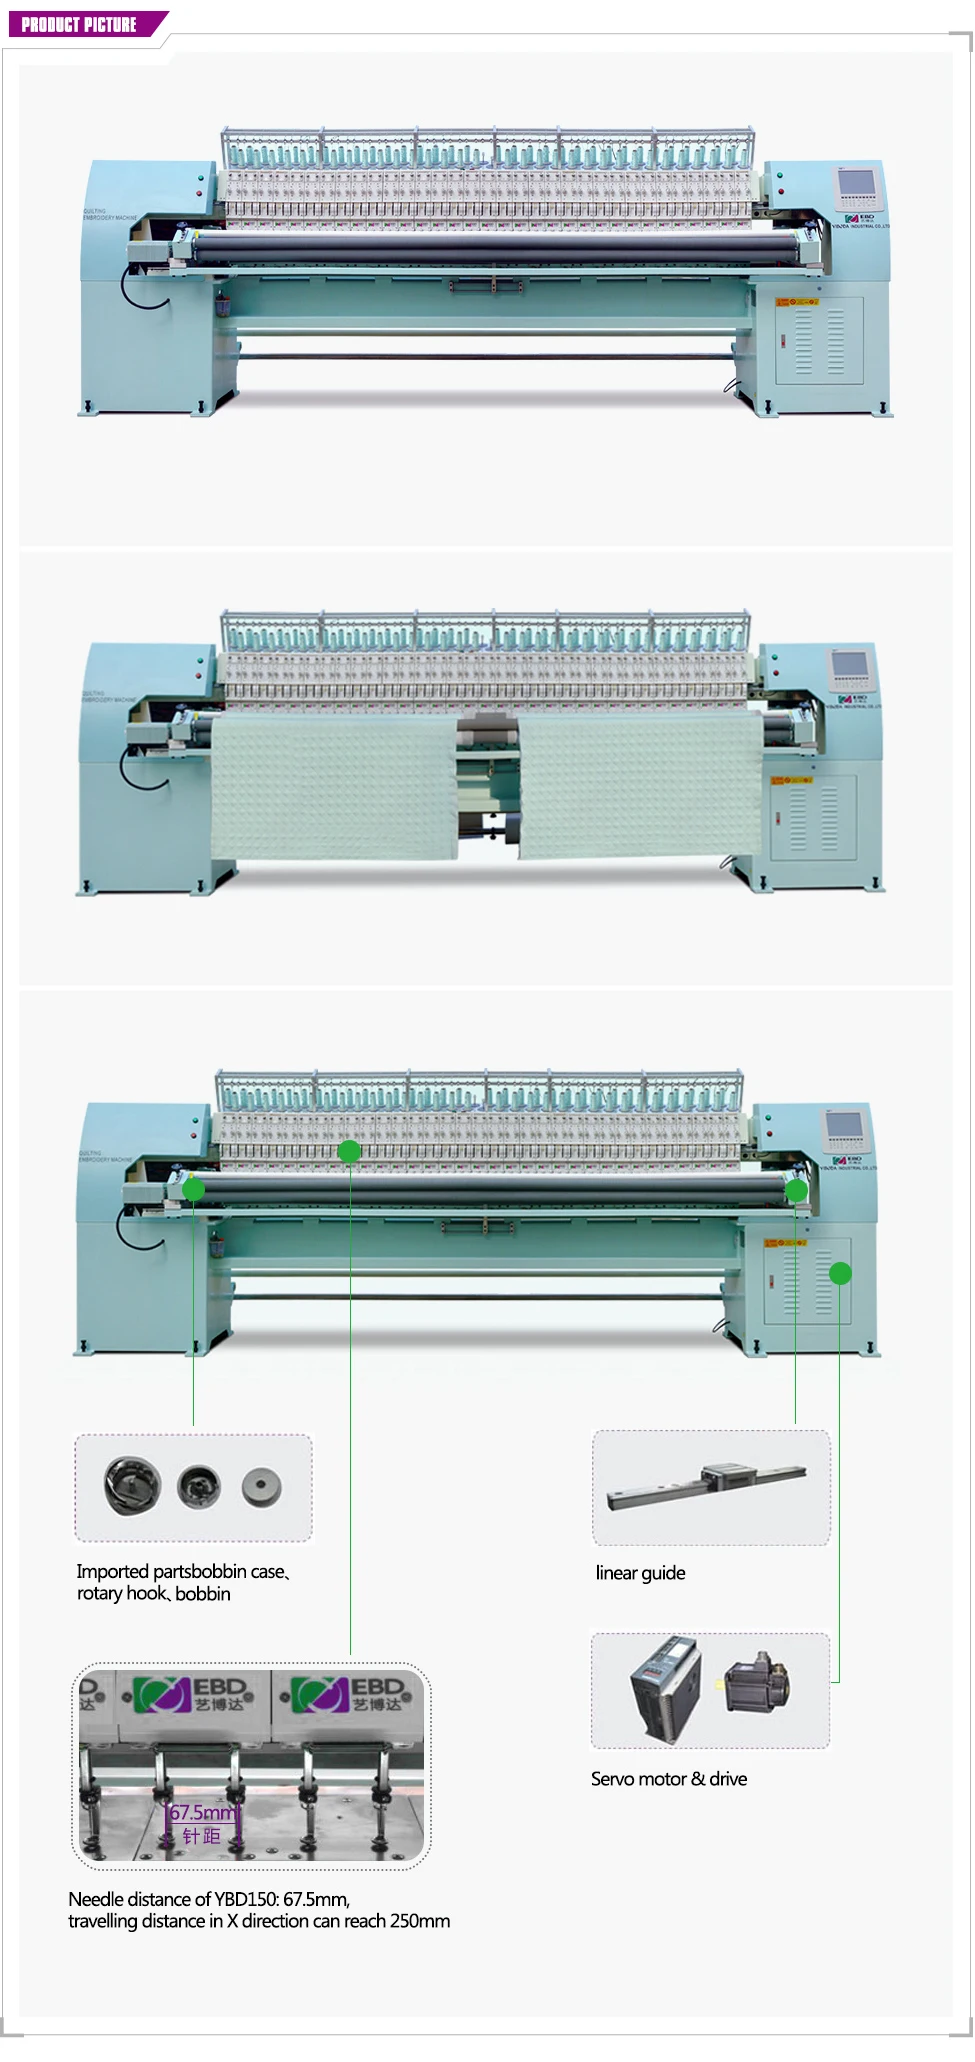 patch maker for swf embroidery machine